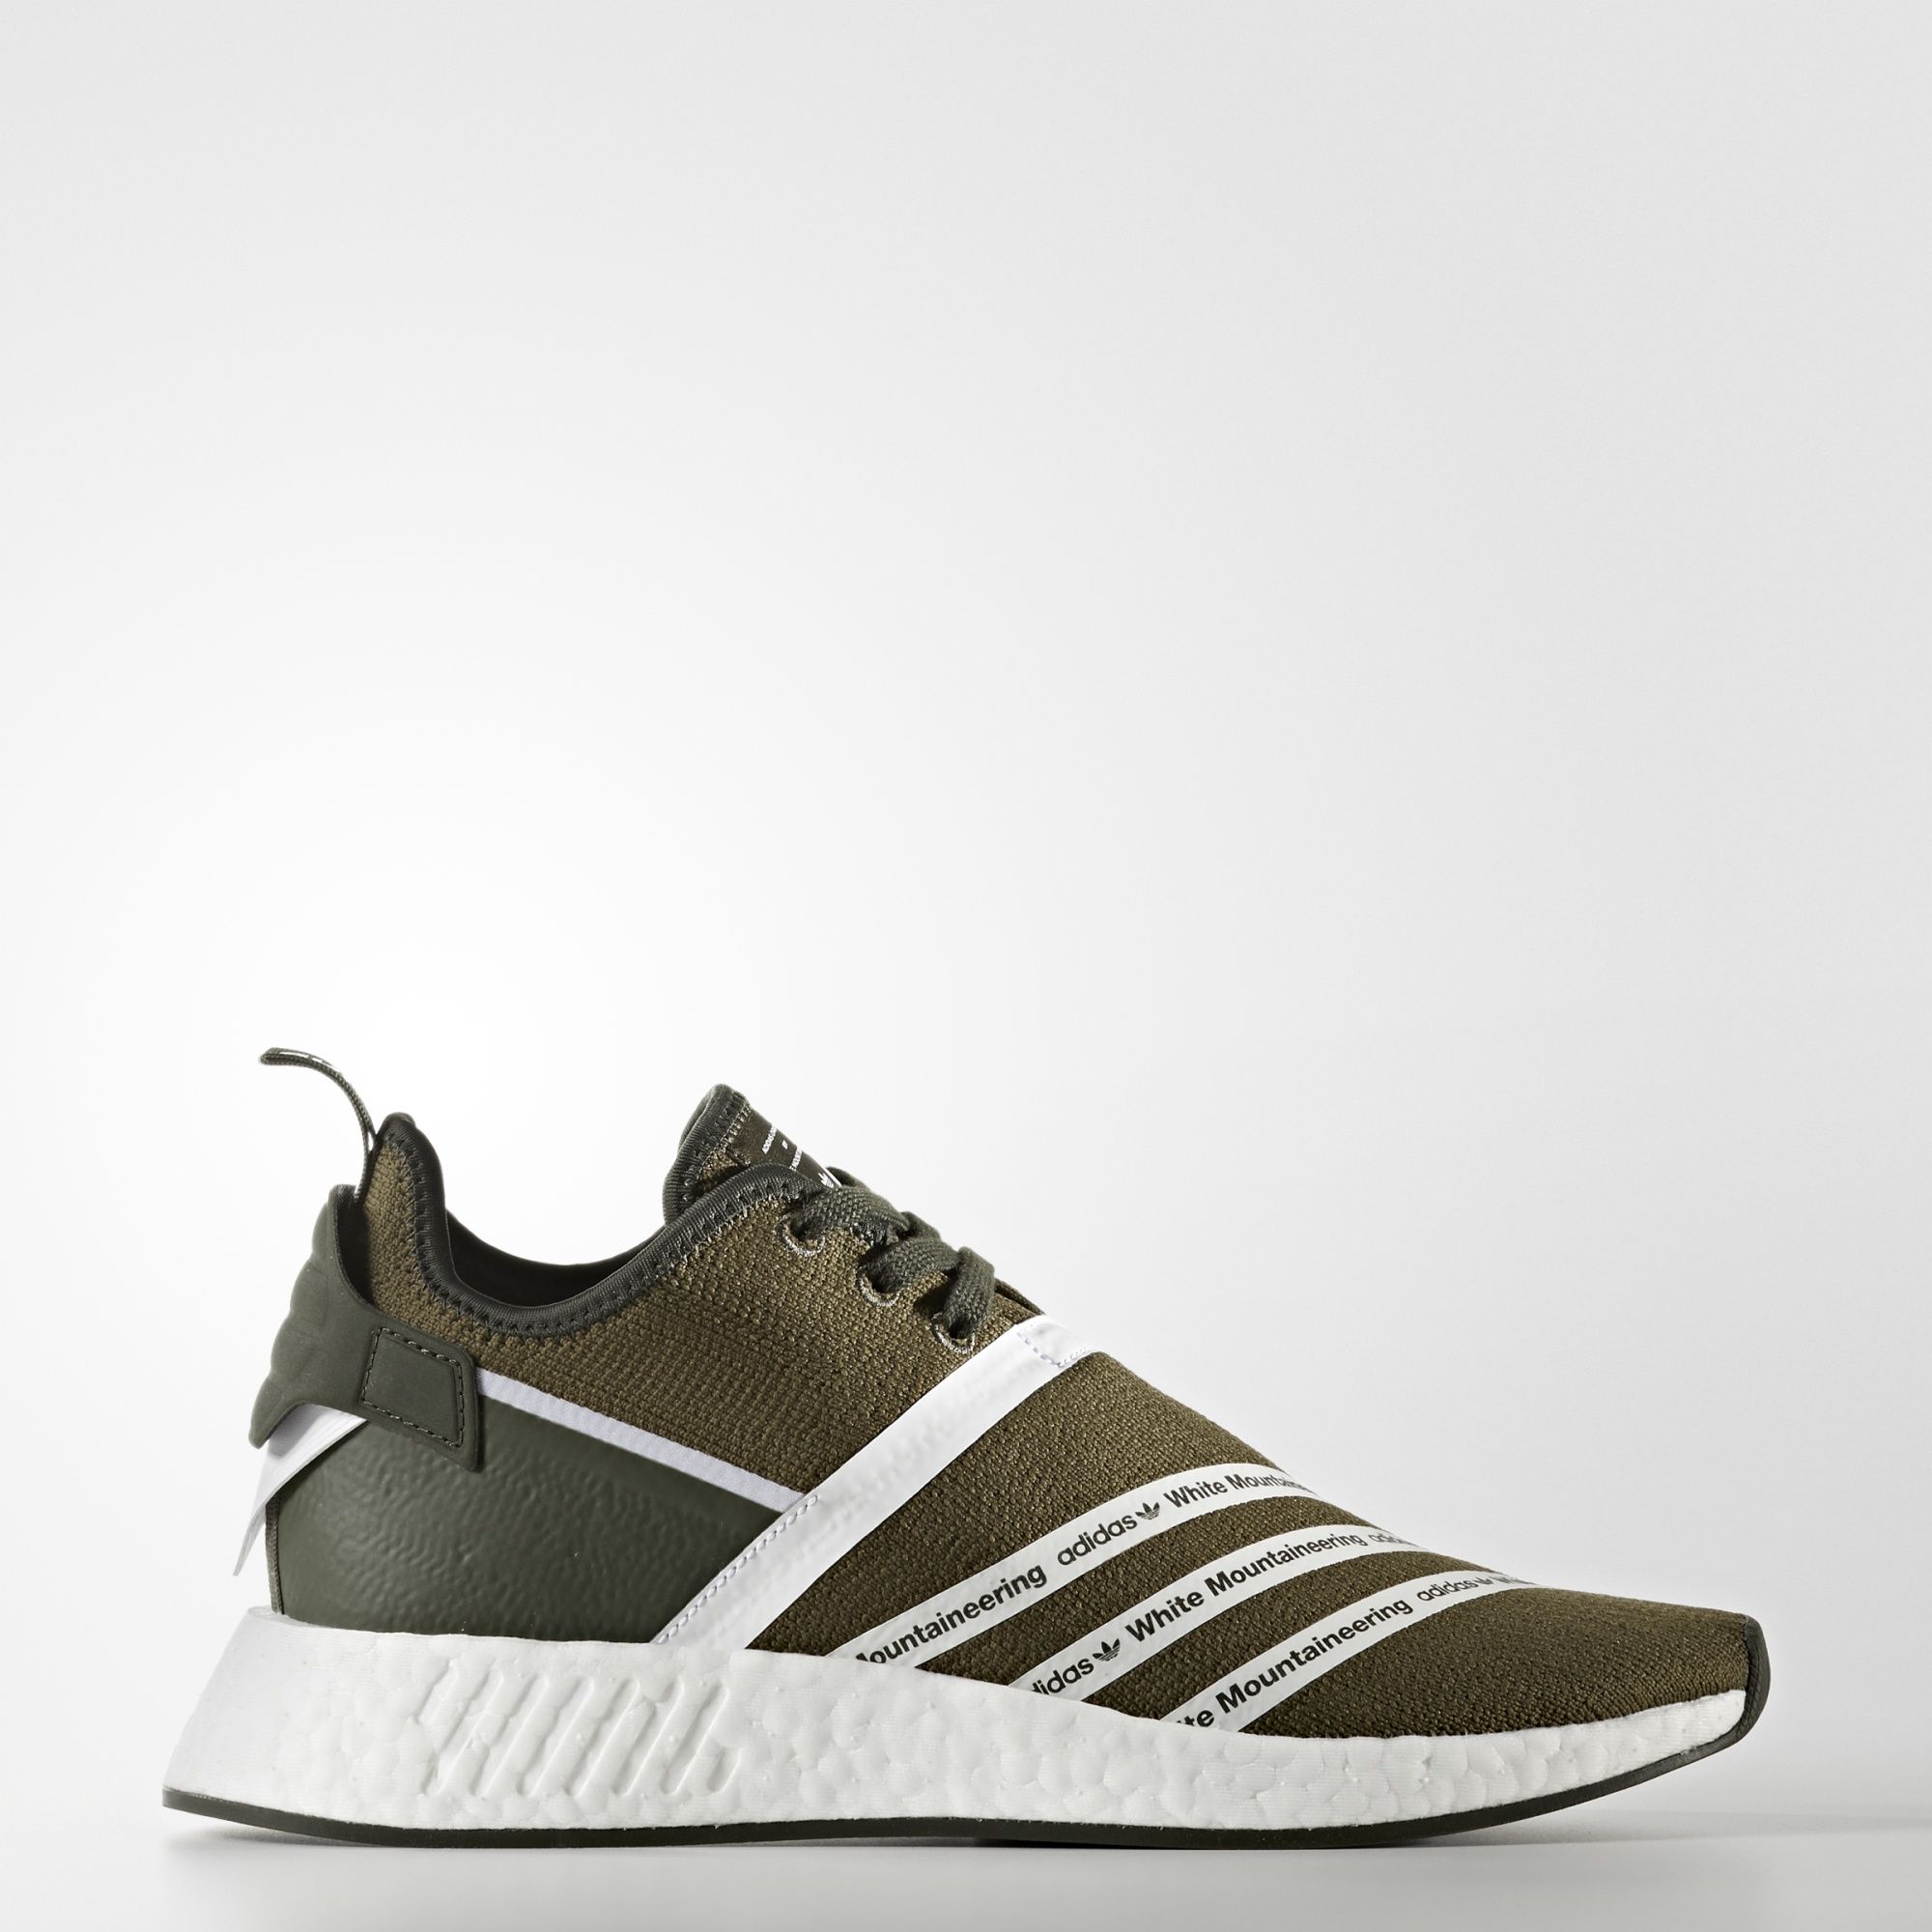 adidas-nmd_r2-pk-x-white-mountaineering-trace-olive-2